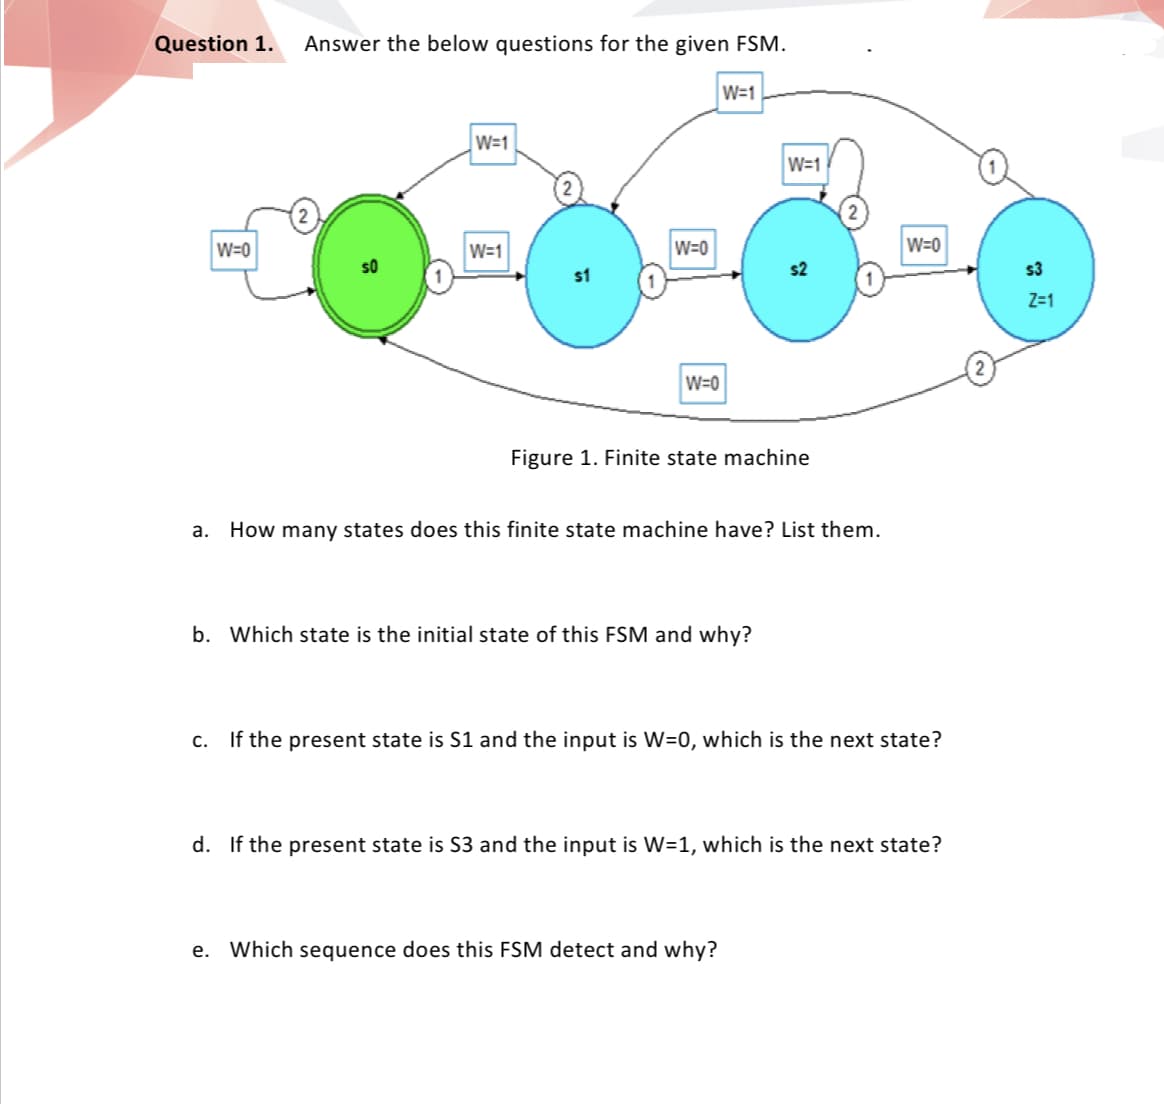 Question 1.
Answer the below questions for the given FSM.
W=1
W=1
W=1
W=0
W=1
W=0
W=0
s3
Z-1
W=0
Figure 1. Finite state machine
а.
How many states does this finite state machine have? List them.
b. Which state is the initial state of this FSM and why?
c. If the present state is S1 and the input is W=0, which is the next state?
d. If the present state is S3 and the input is W=1, which is the next state?
Which sequence does this FSM detect and why?
е.
